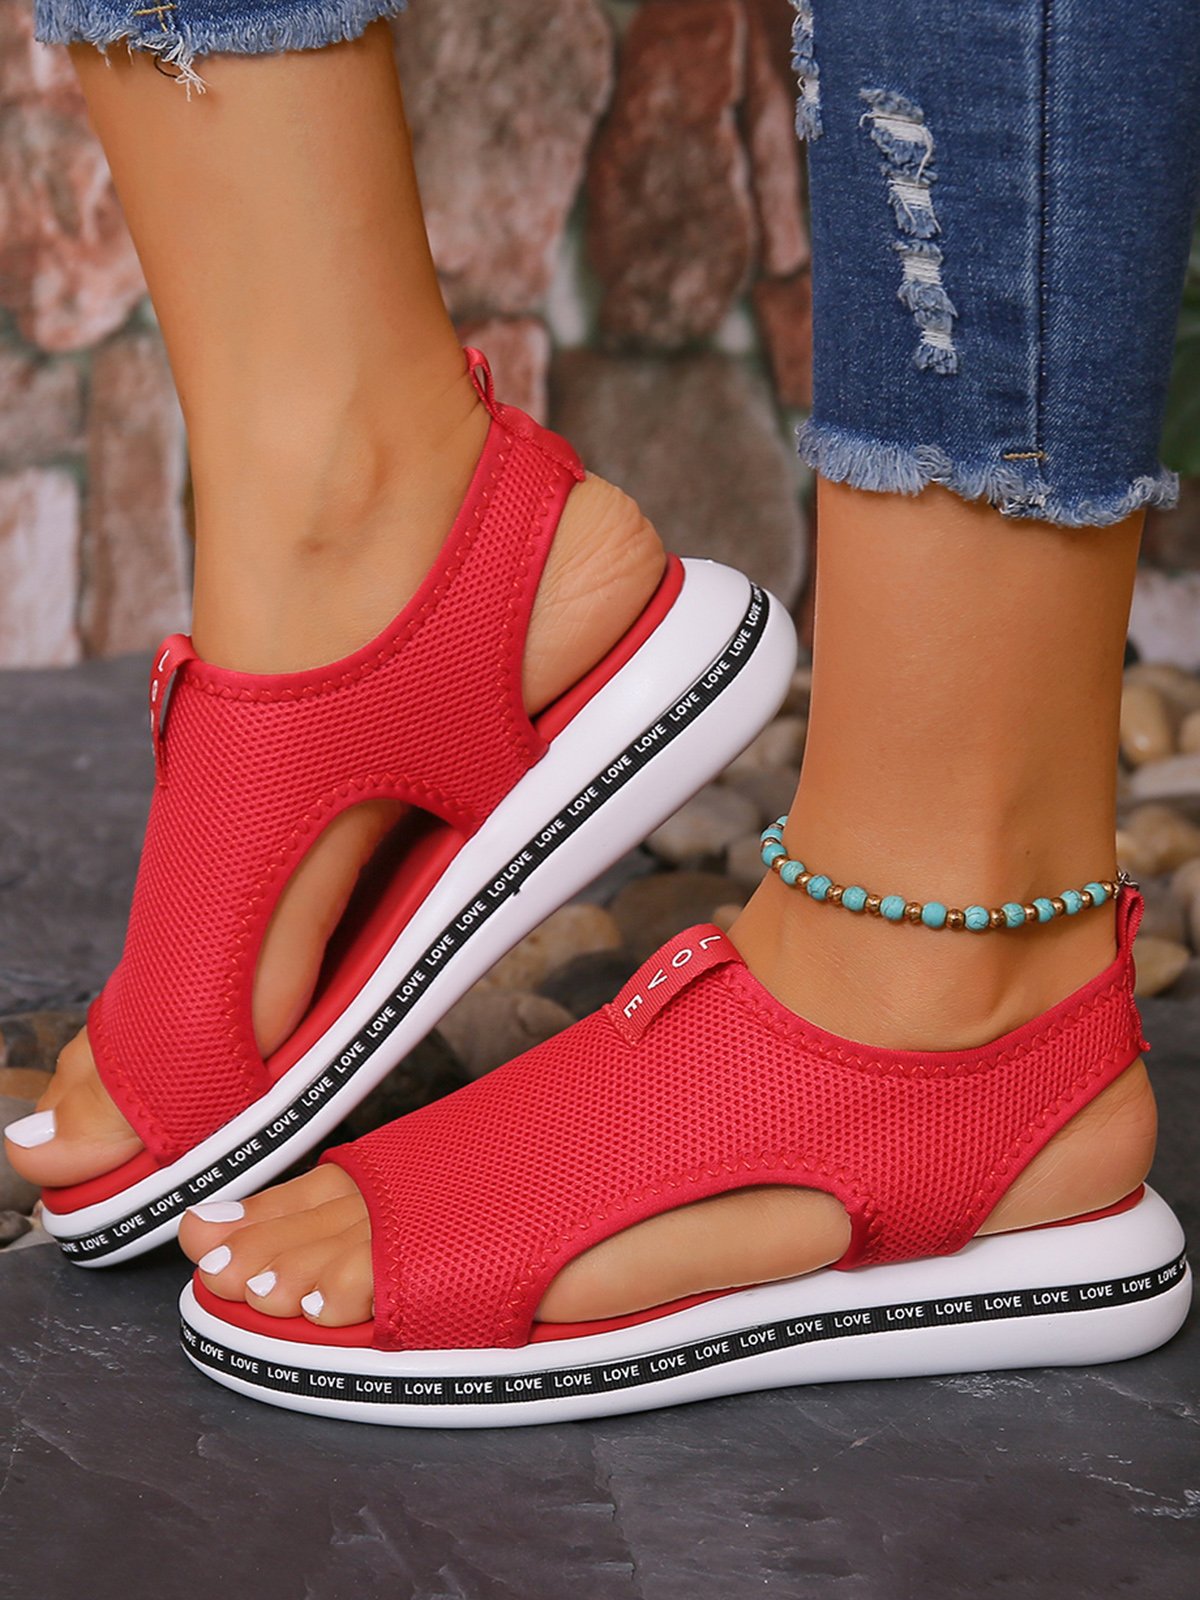 Breathable Mesh Fabric Cutout Slip On Sports Sandals